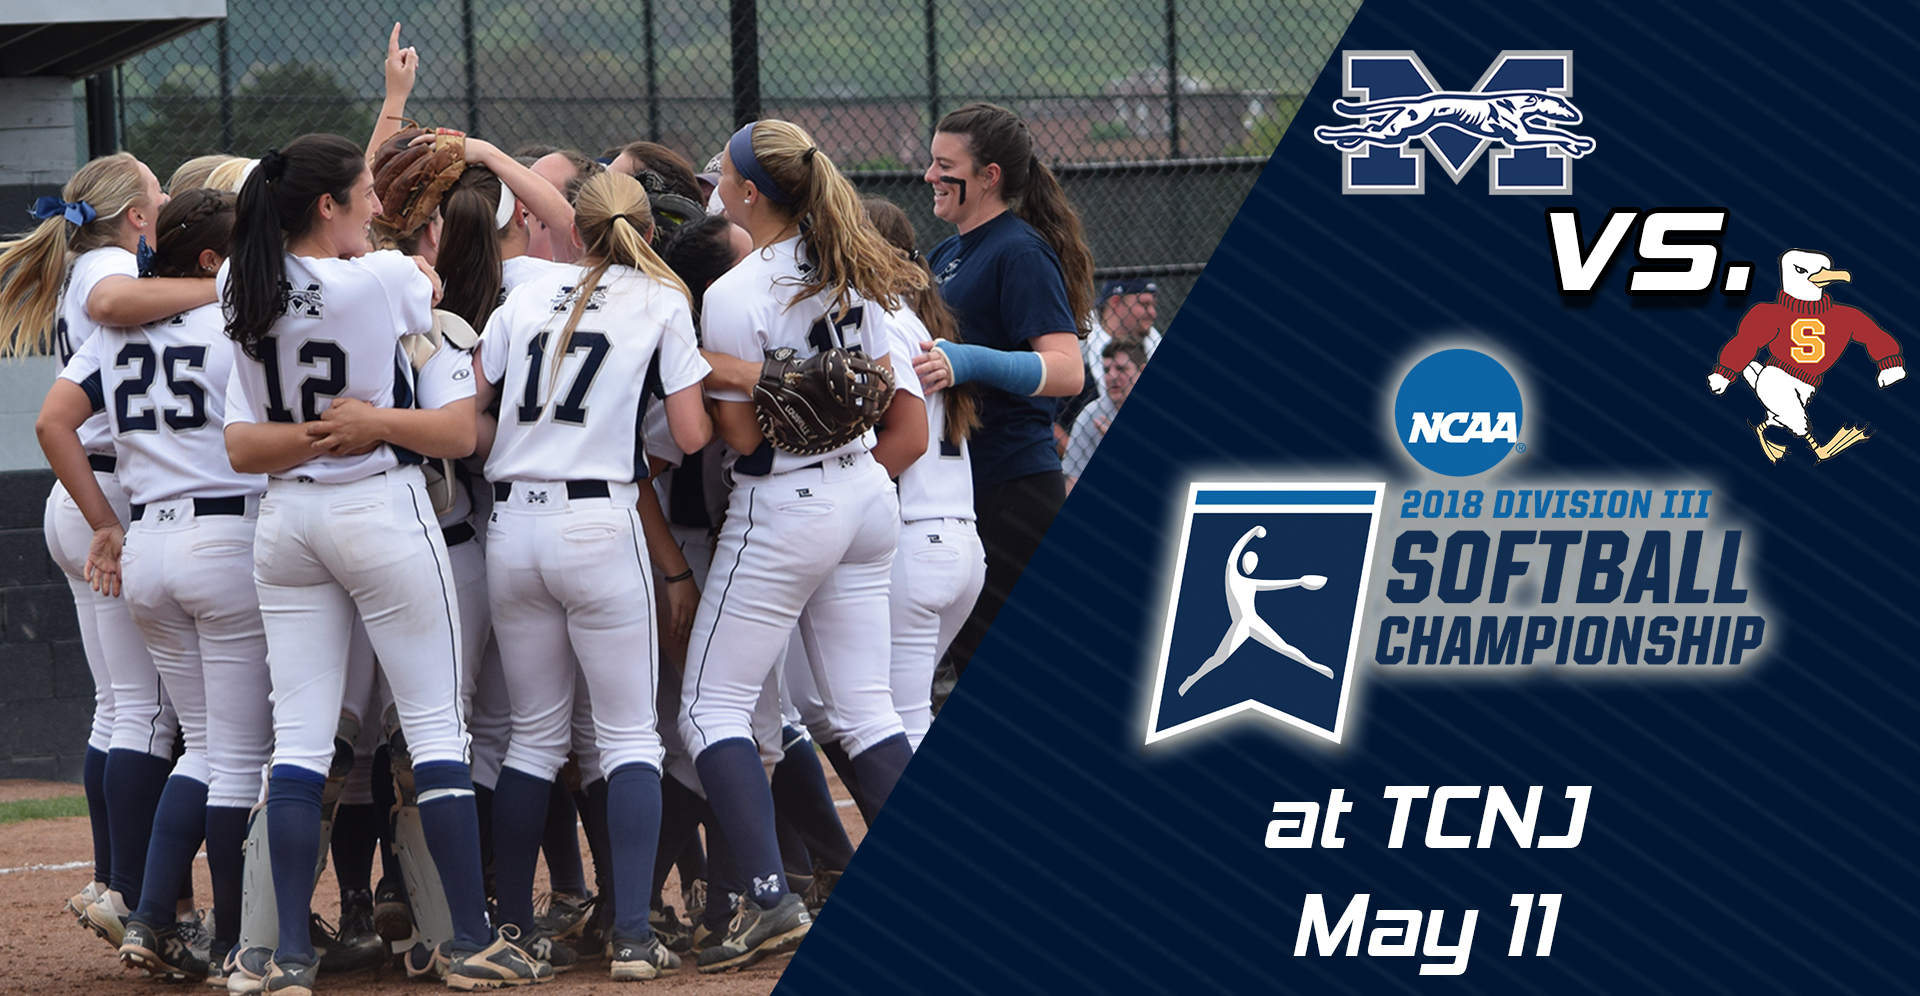 The softball team begins the 2018 NCAA DIII Regionals on Friday, May 11 versus Salisbury (Md.) University in Ewing, New Jersey.